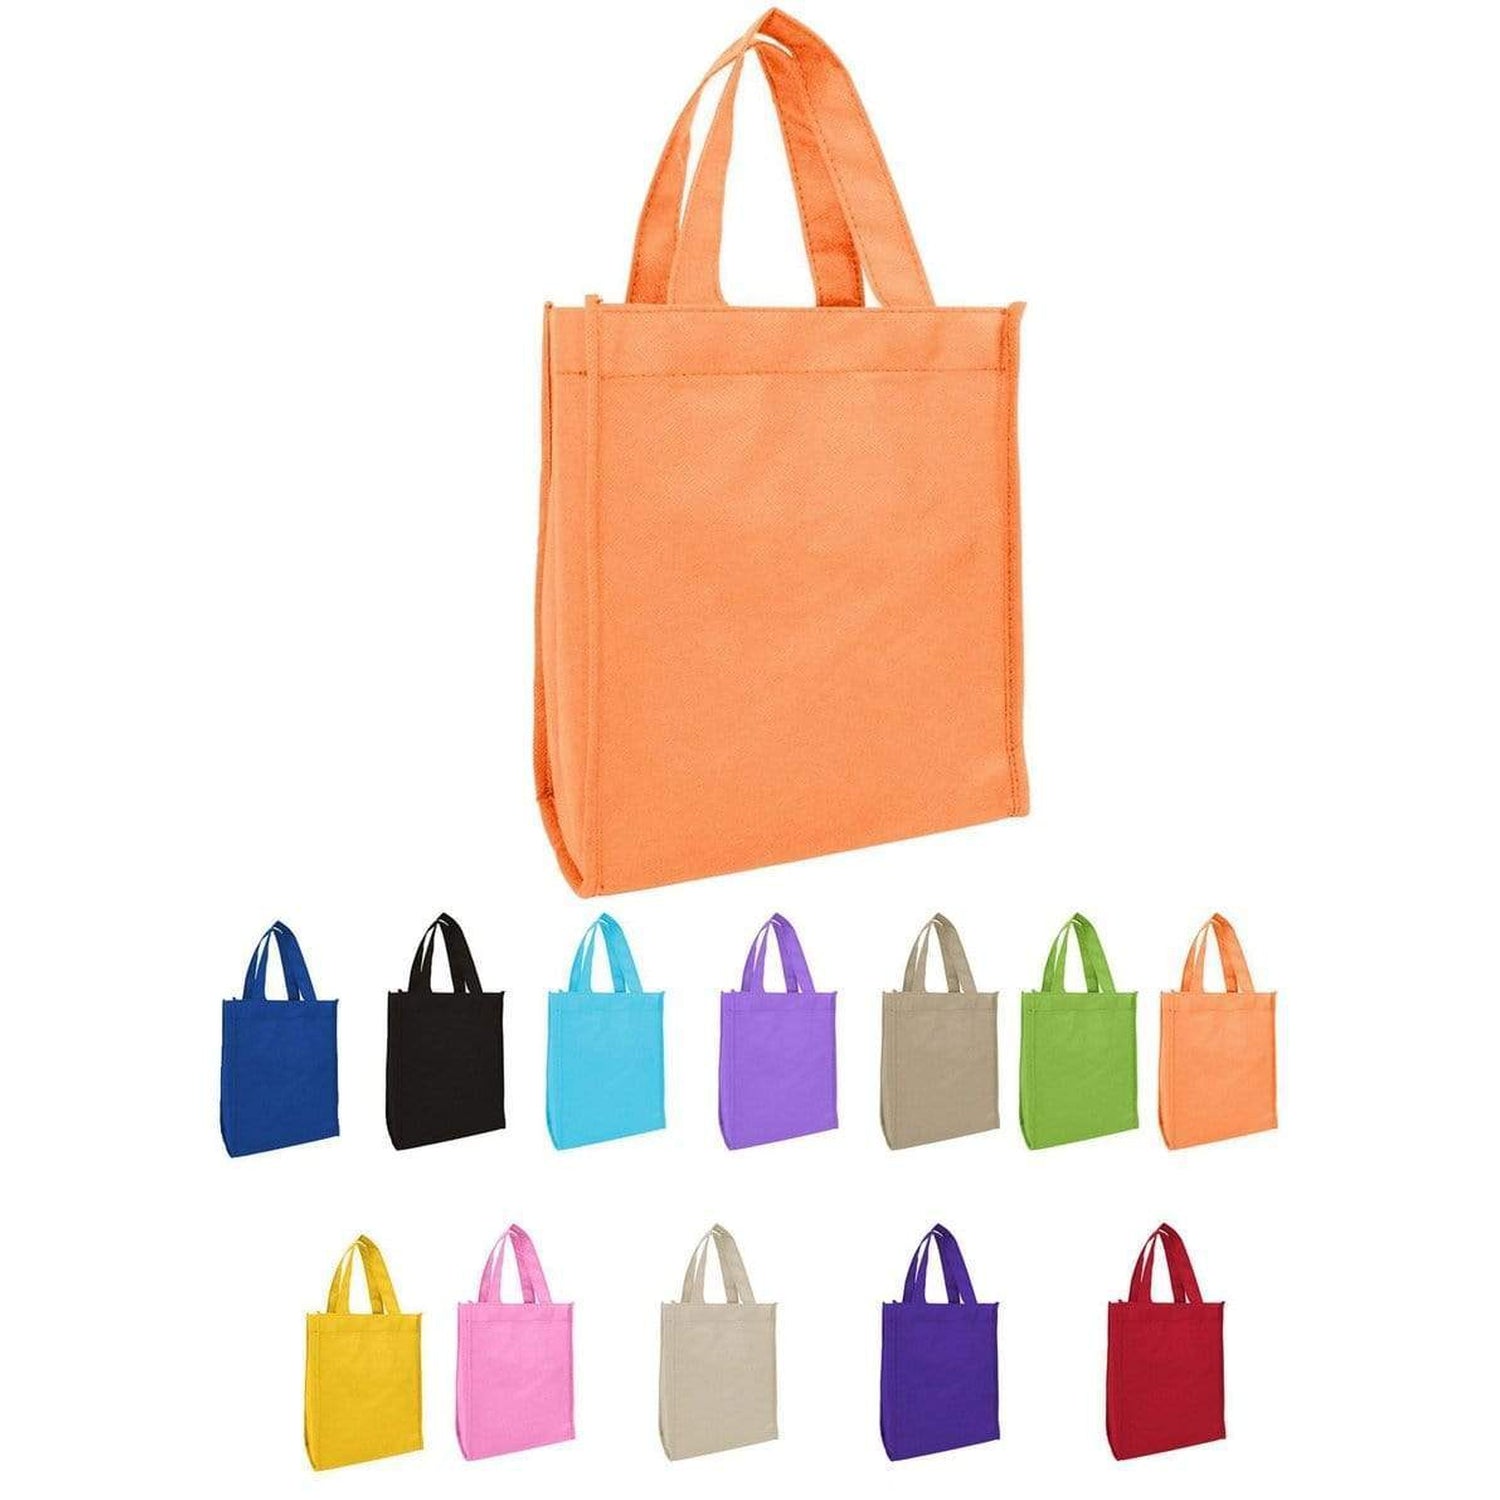 Small Tote Bags in Bulk - Non-Woven Gusseted Gift Bags Wholesale